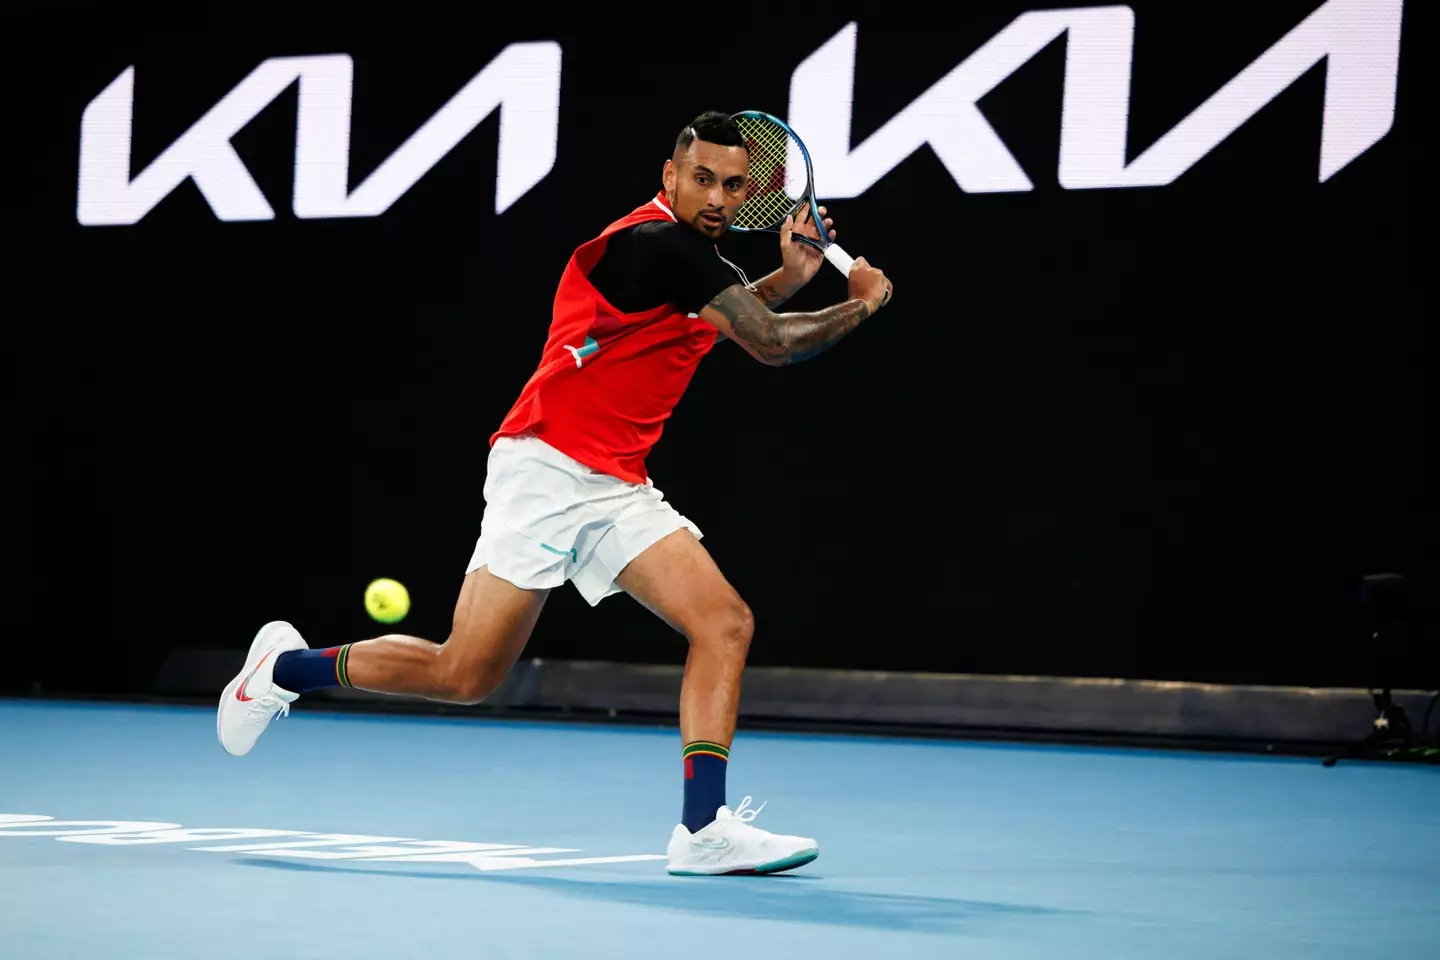 Nick Kyrgios has picked up plenty of fines over his career.